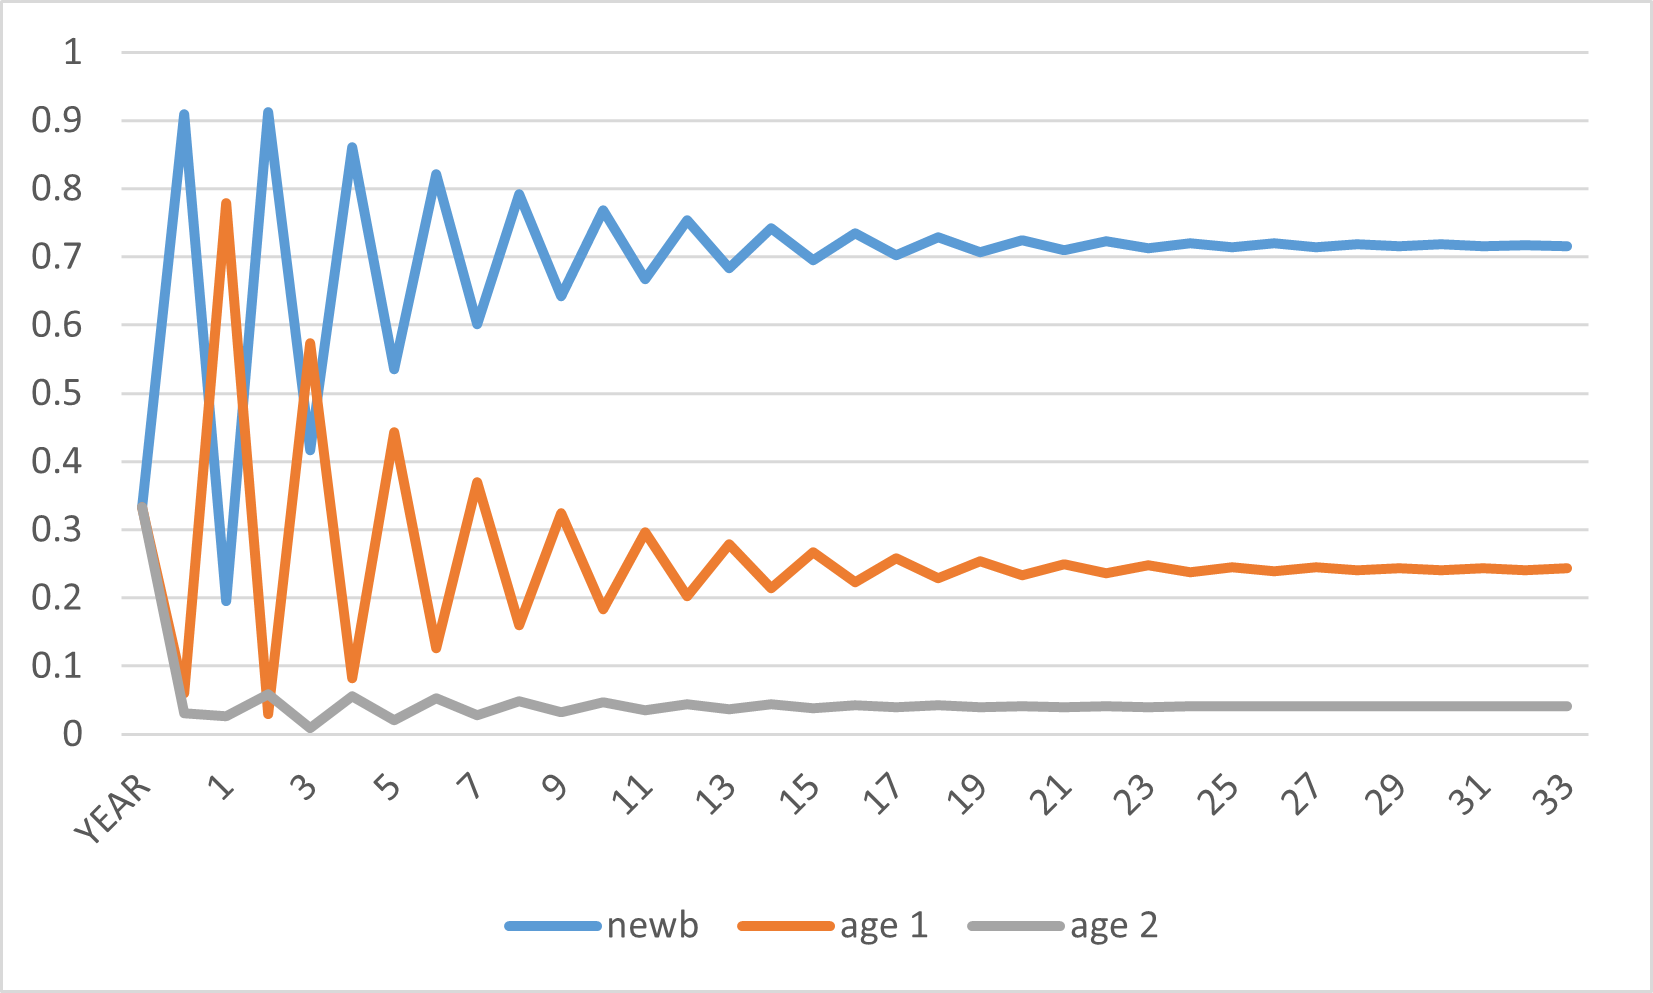 This line graph shows the share of newborns, one year-olds, and two-year olds over time. Each age group has its own line. In year zero, each age group is at 33% of the population. After that, the two year-olds sink down and remain at about 4% of the population. Meanwhile, the fraction of newborns and the fraction of one year-olds gyrate up and down in opposite directions, but less so overtime, until finally, at about year 19, they are moving very slightly up and down around a fixed level of about 72% for newborns and 24% for one year-olds.